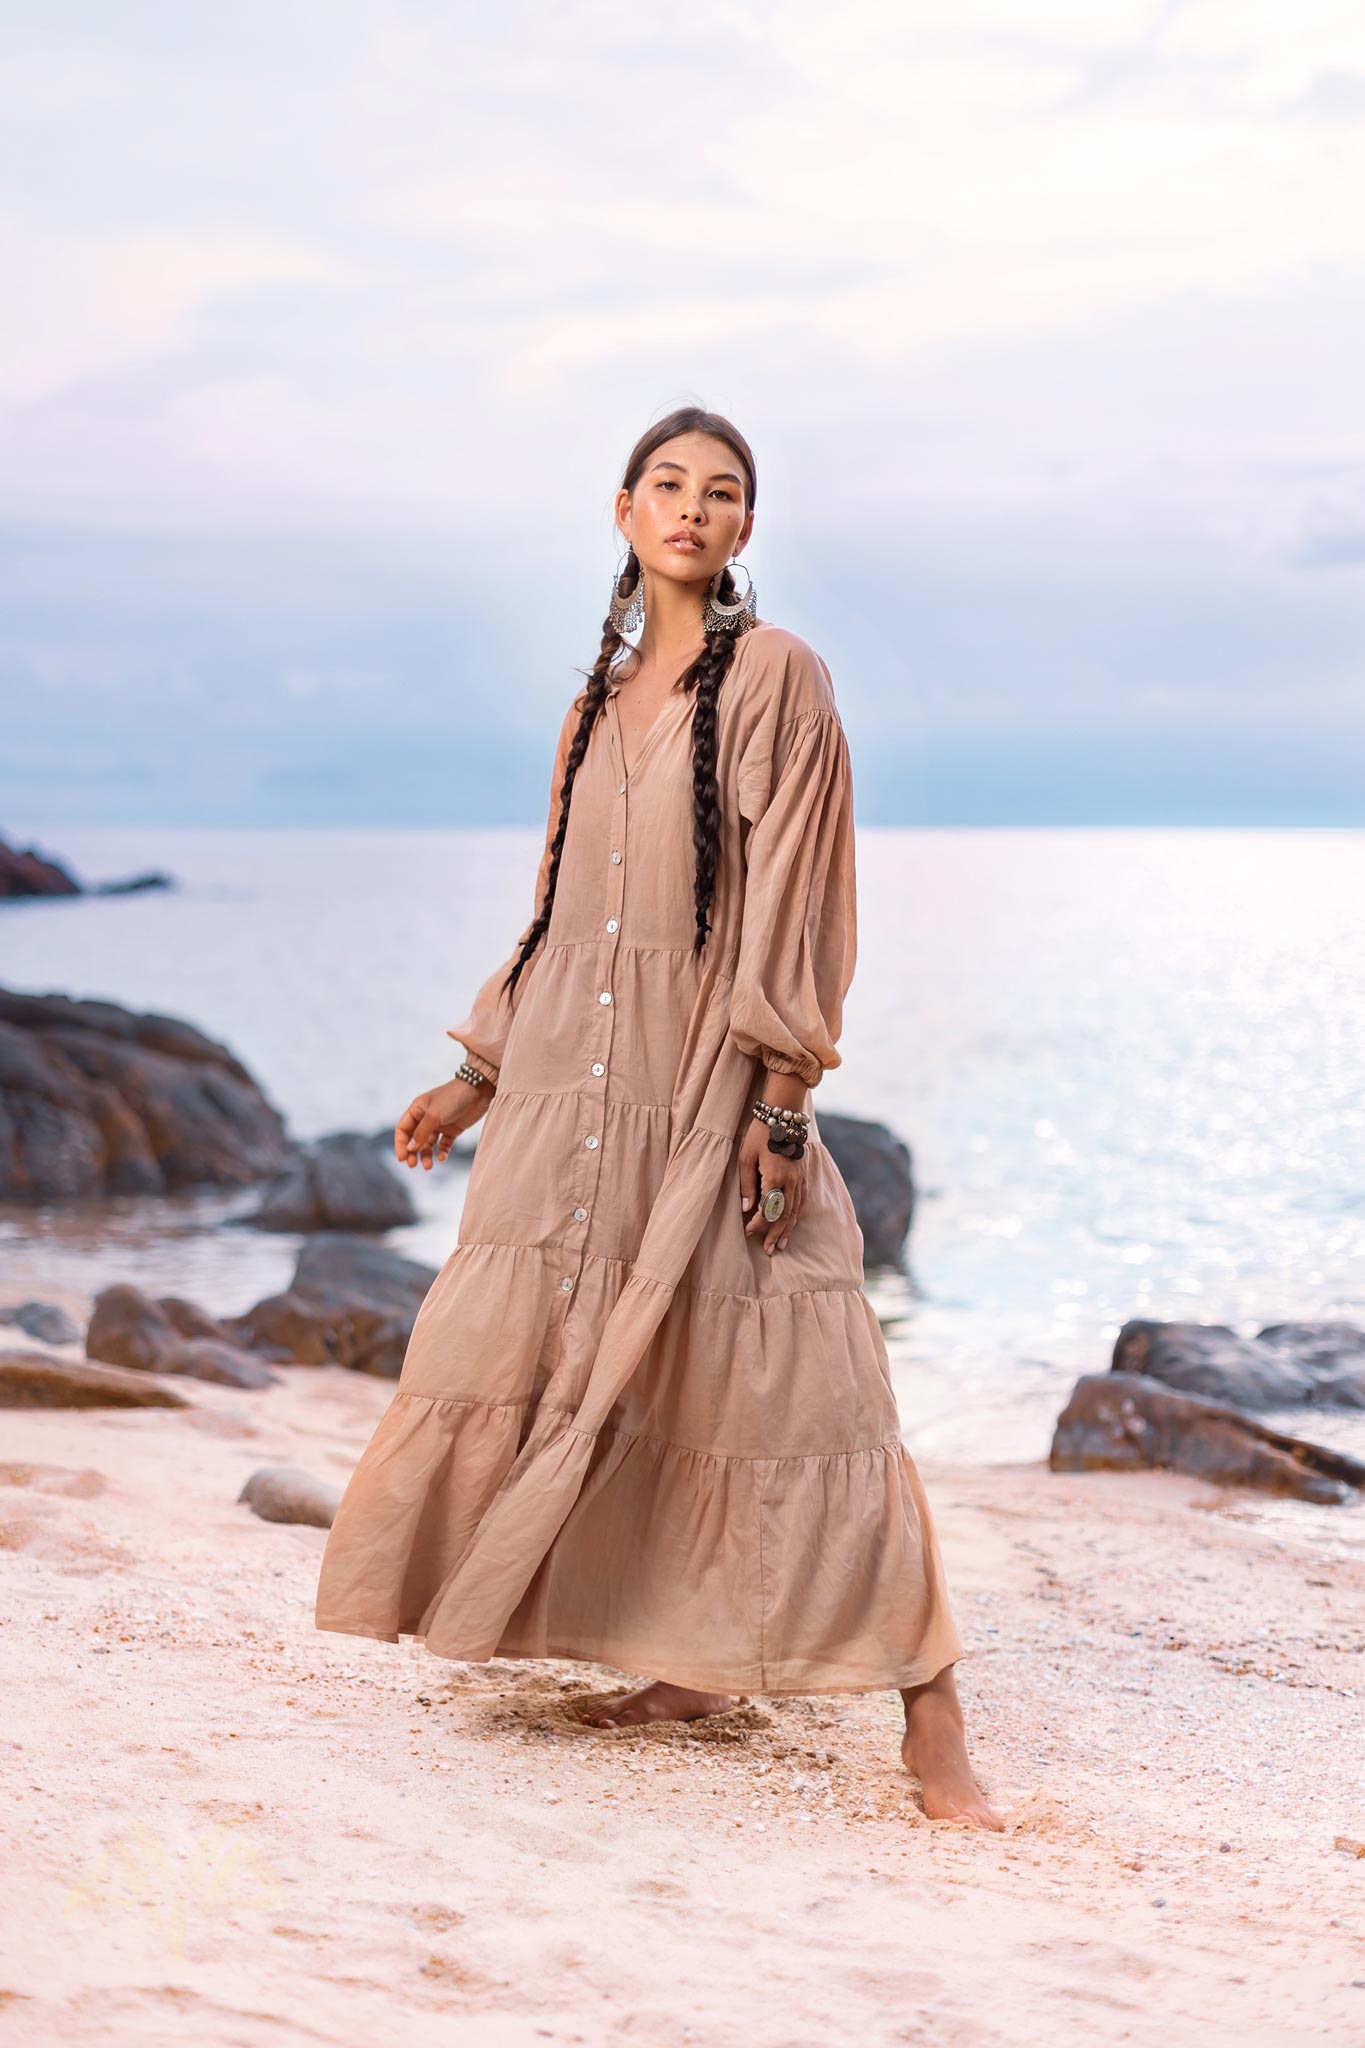 Bohemian prom dress in beige – A beautiful light cotton dress that is perfect for any bohemian-themed event.